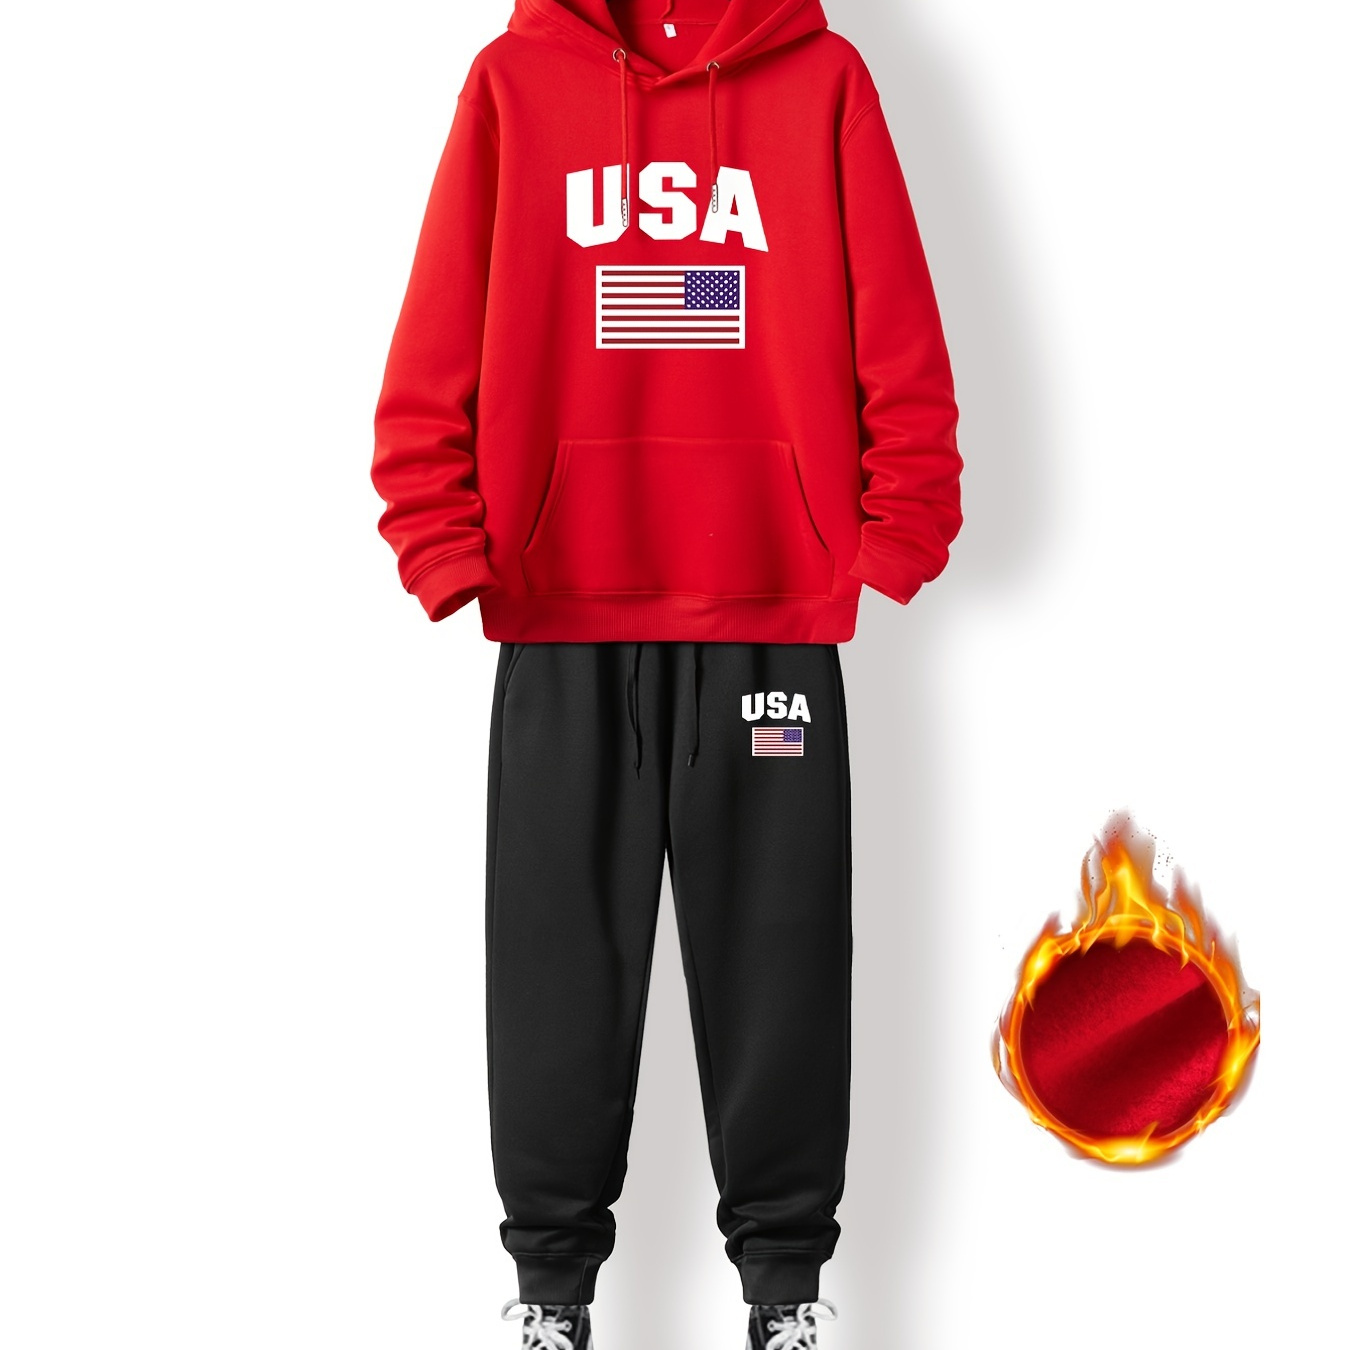 

Men's Plus Size 'usa' Print Plain Color Drawstring Hoodie Warm Fleece Pocket Hooded Sweatshirt & Loose Drawstring Long Sweatpants For Autumn Winter, Oversized Clothing Set For Big And Tall Guys